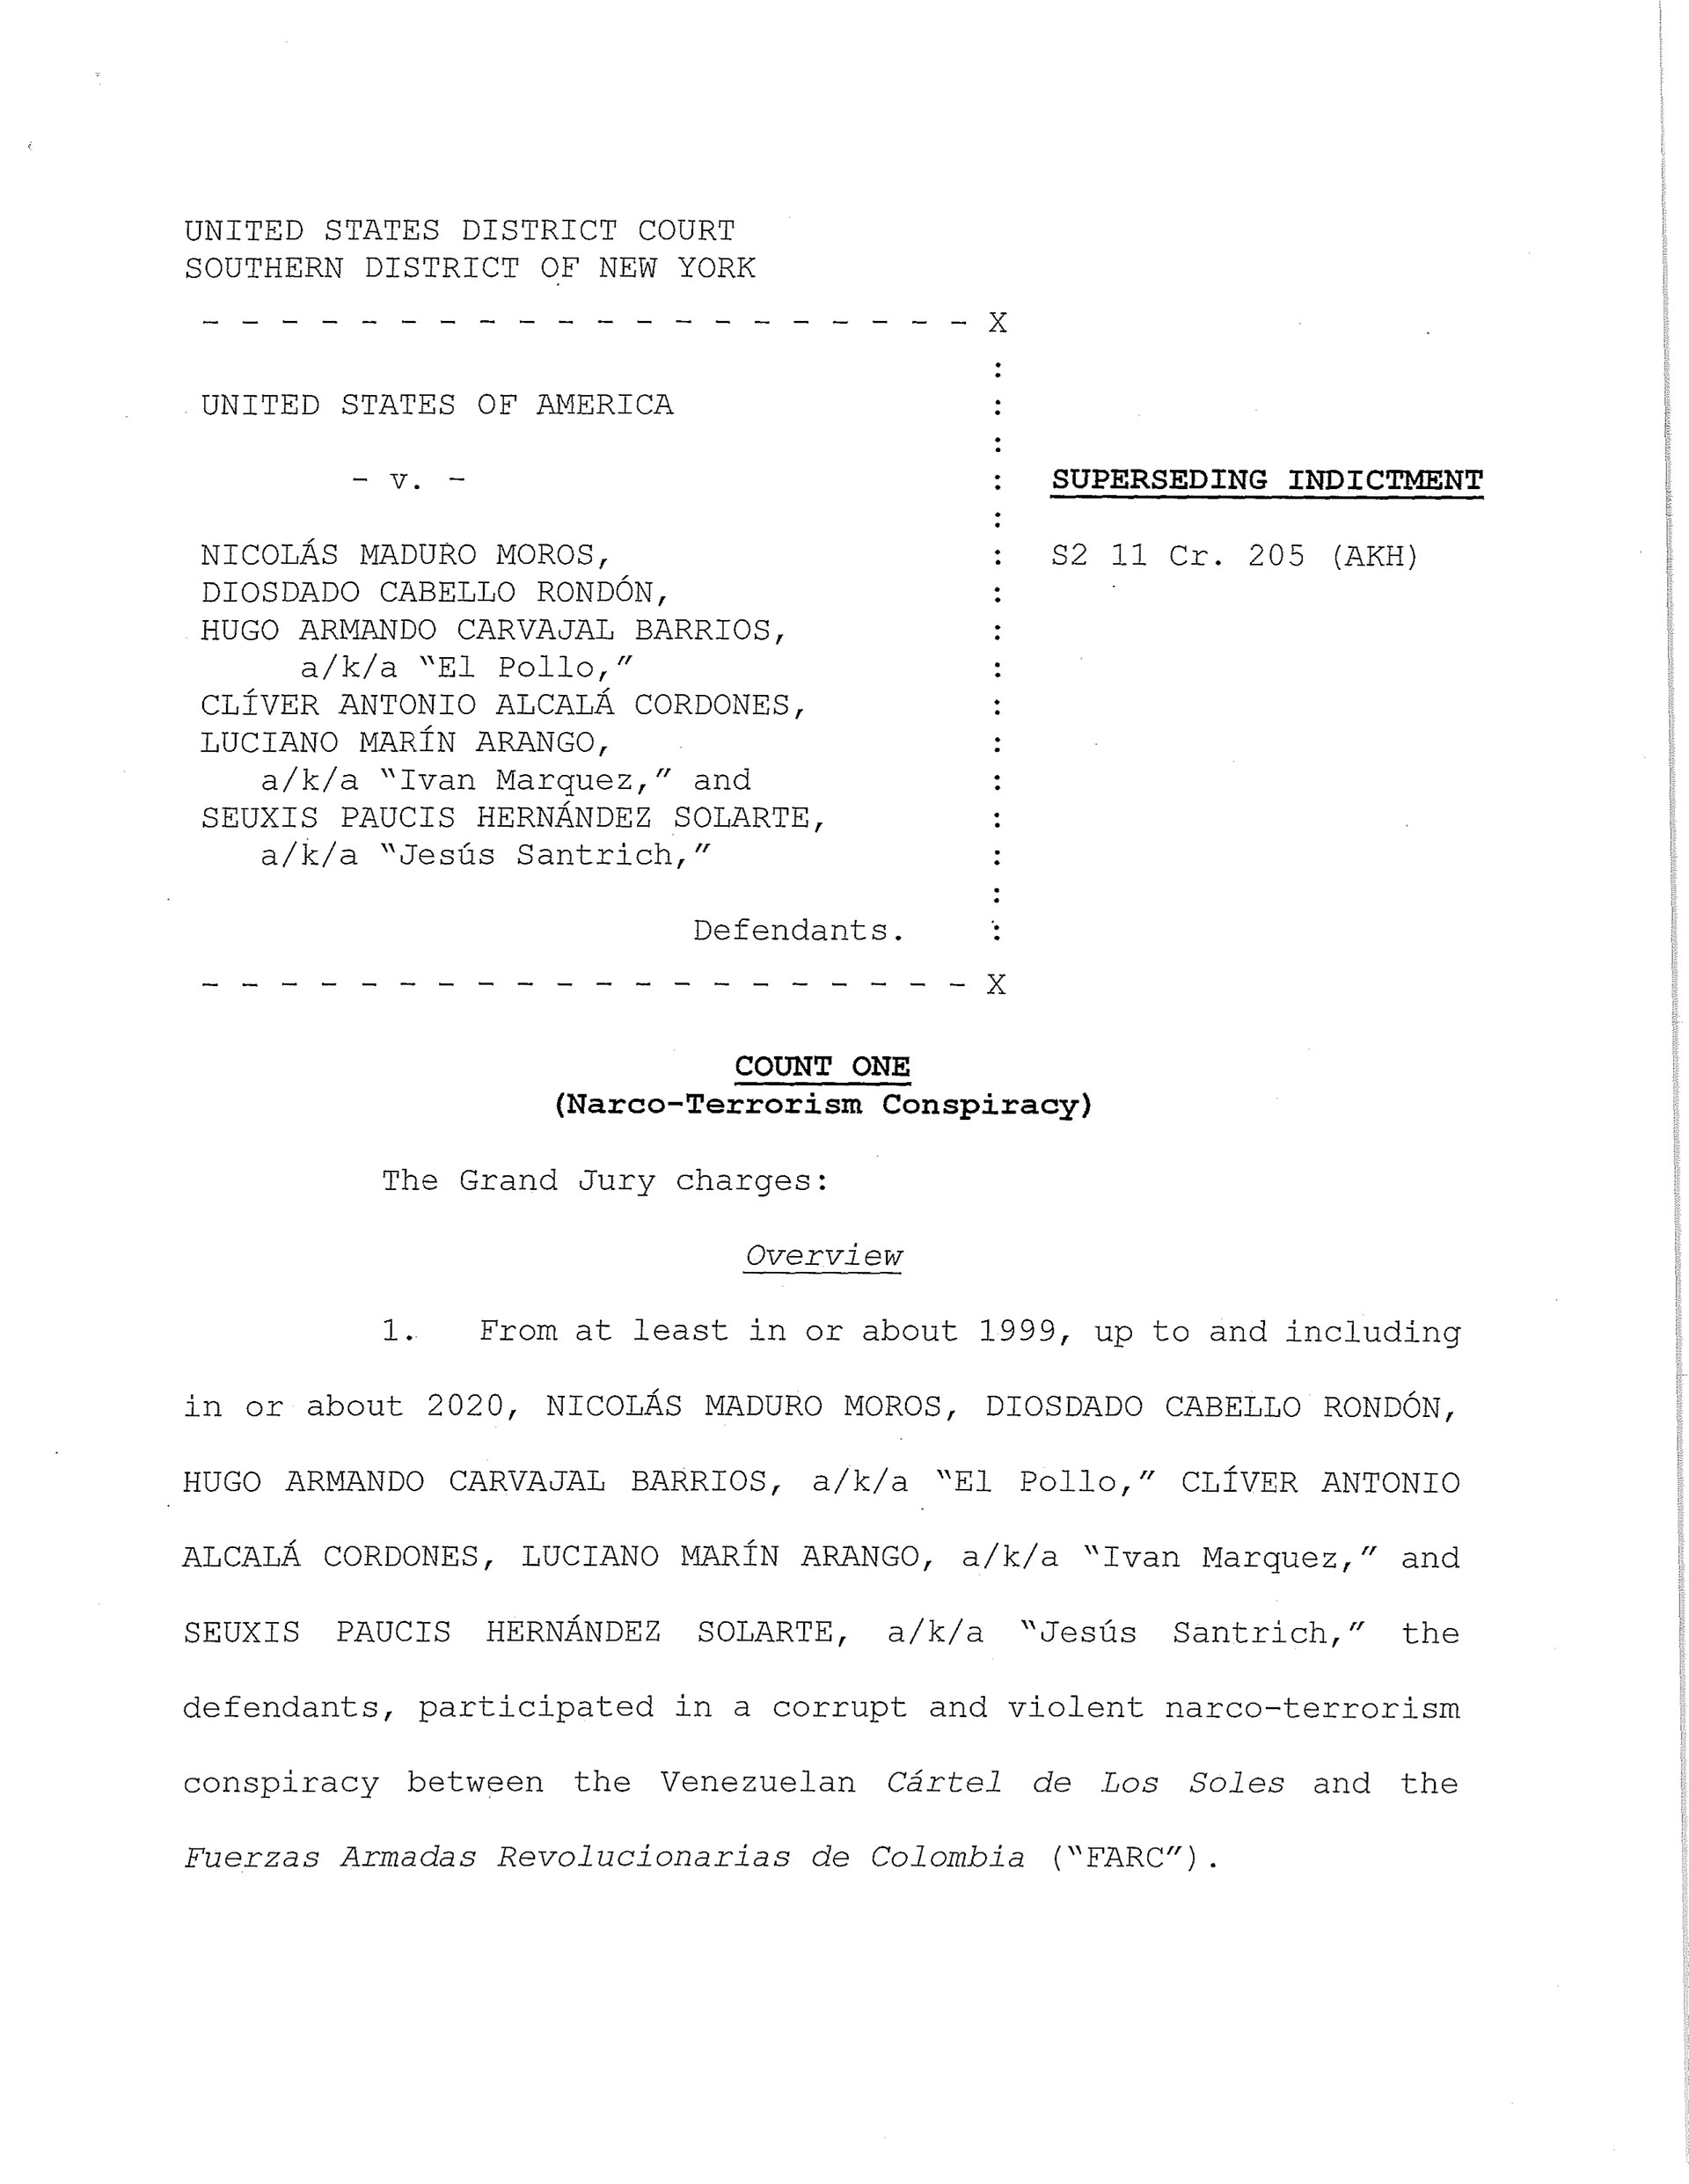 The file signed by the attorney for the Southern District of New York, Geoffrey Berman